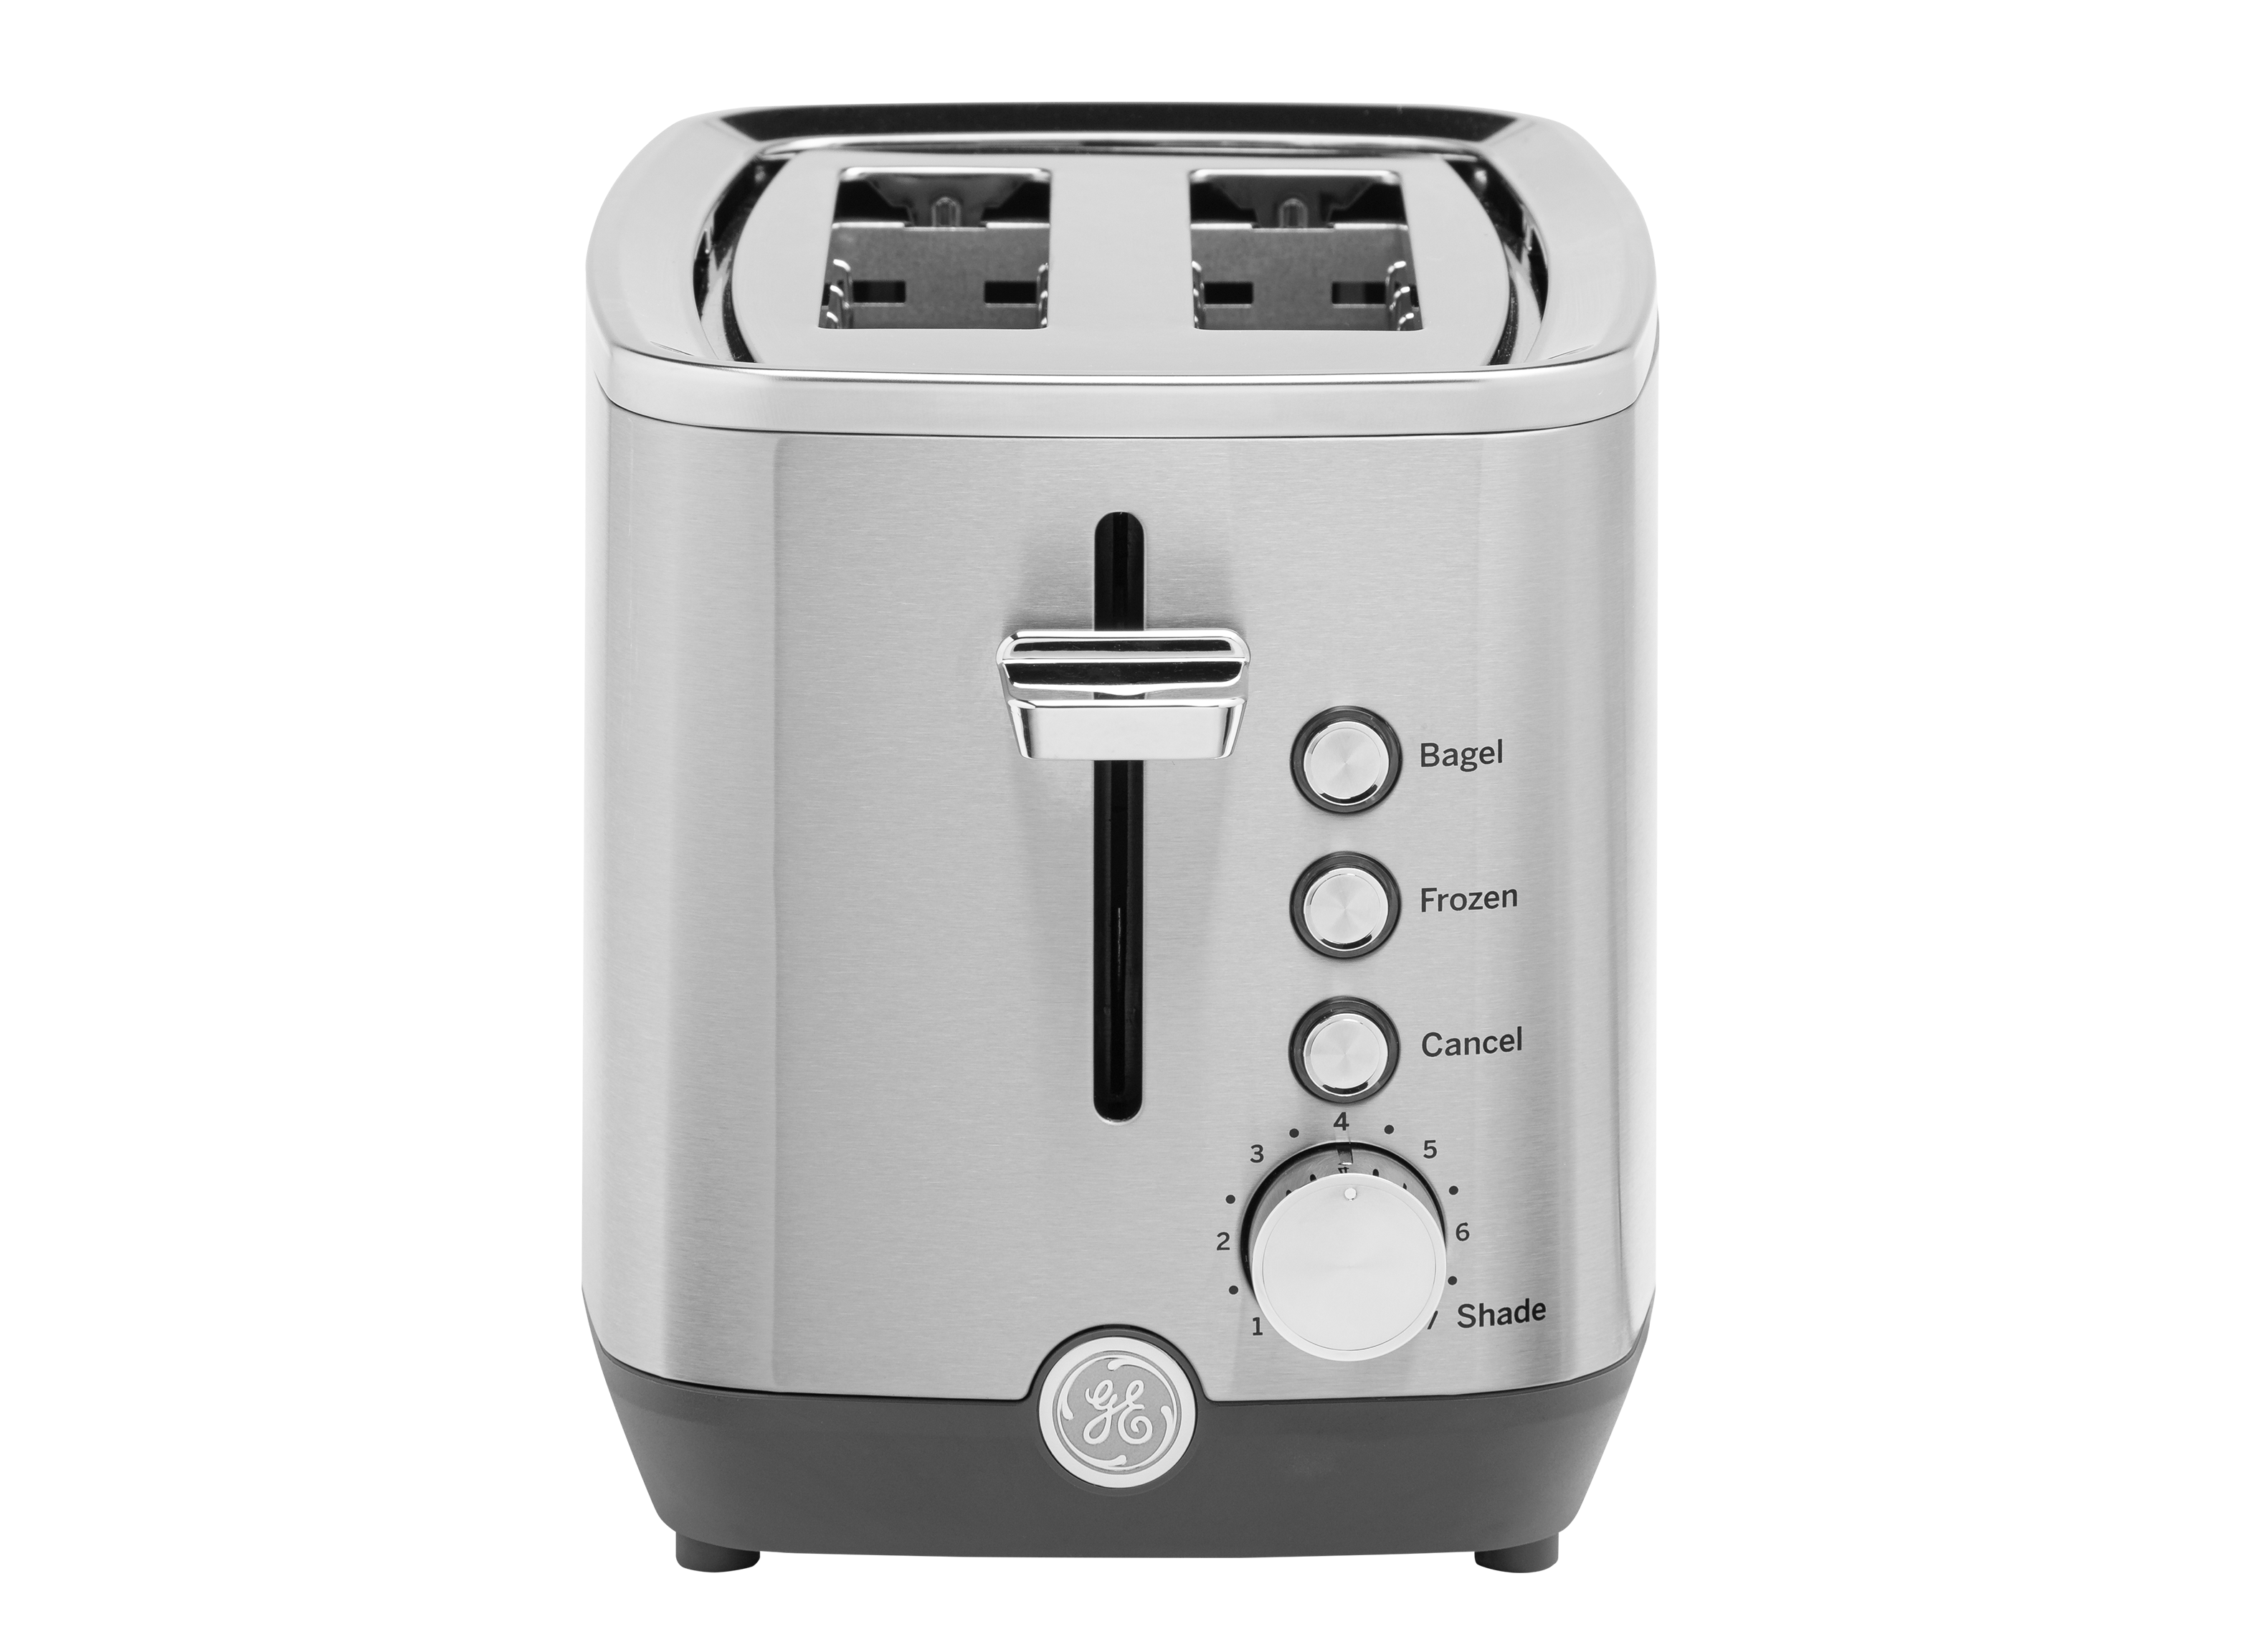 https://crdms.images.consumerreports.org/prod/products/cr/models/403039-2-slice-toasters-ge-g9tma2sspss-10017879.png